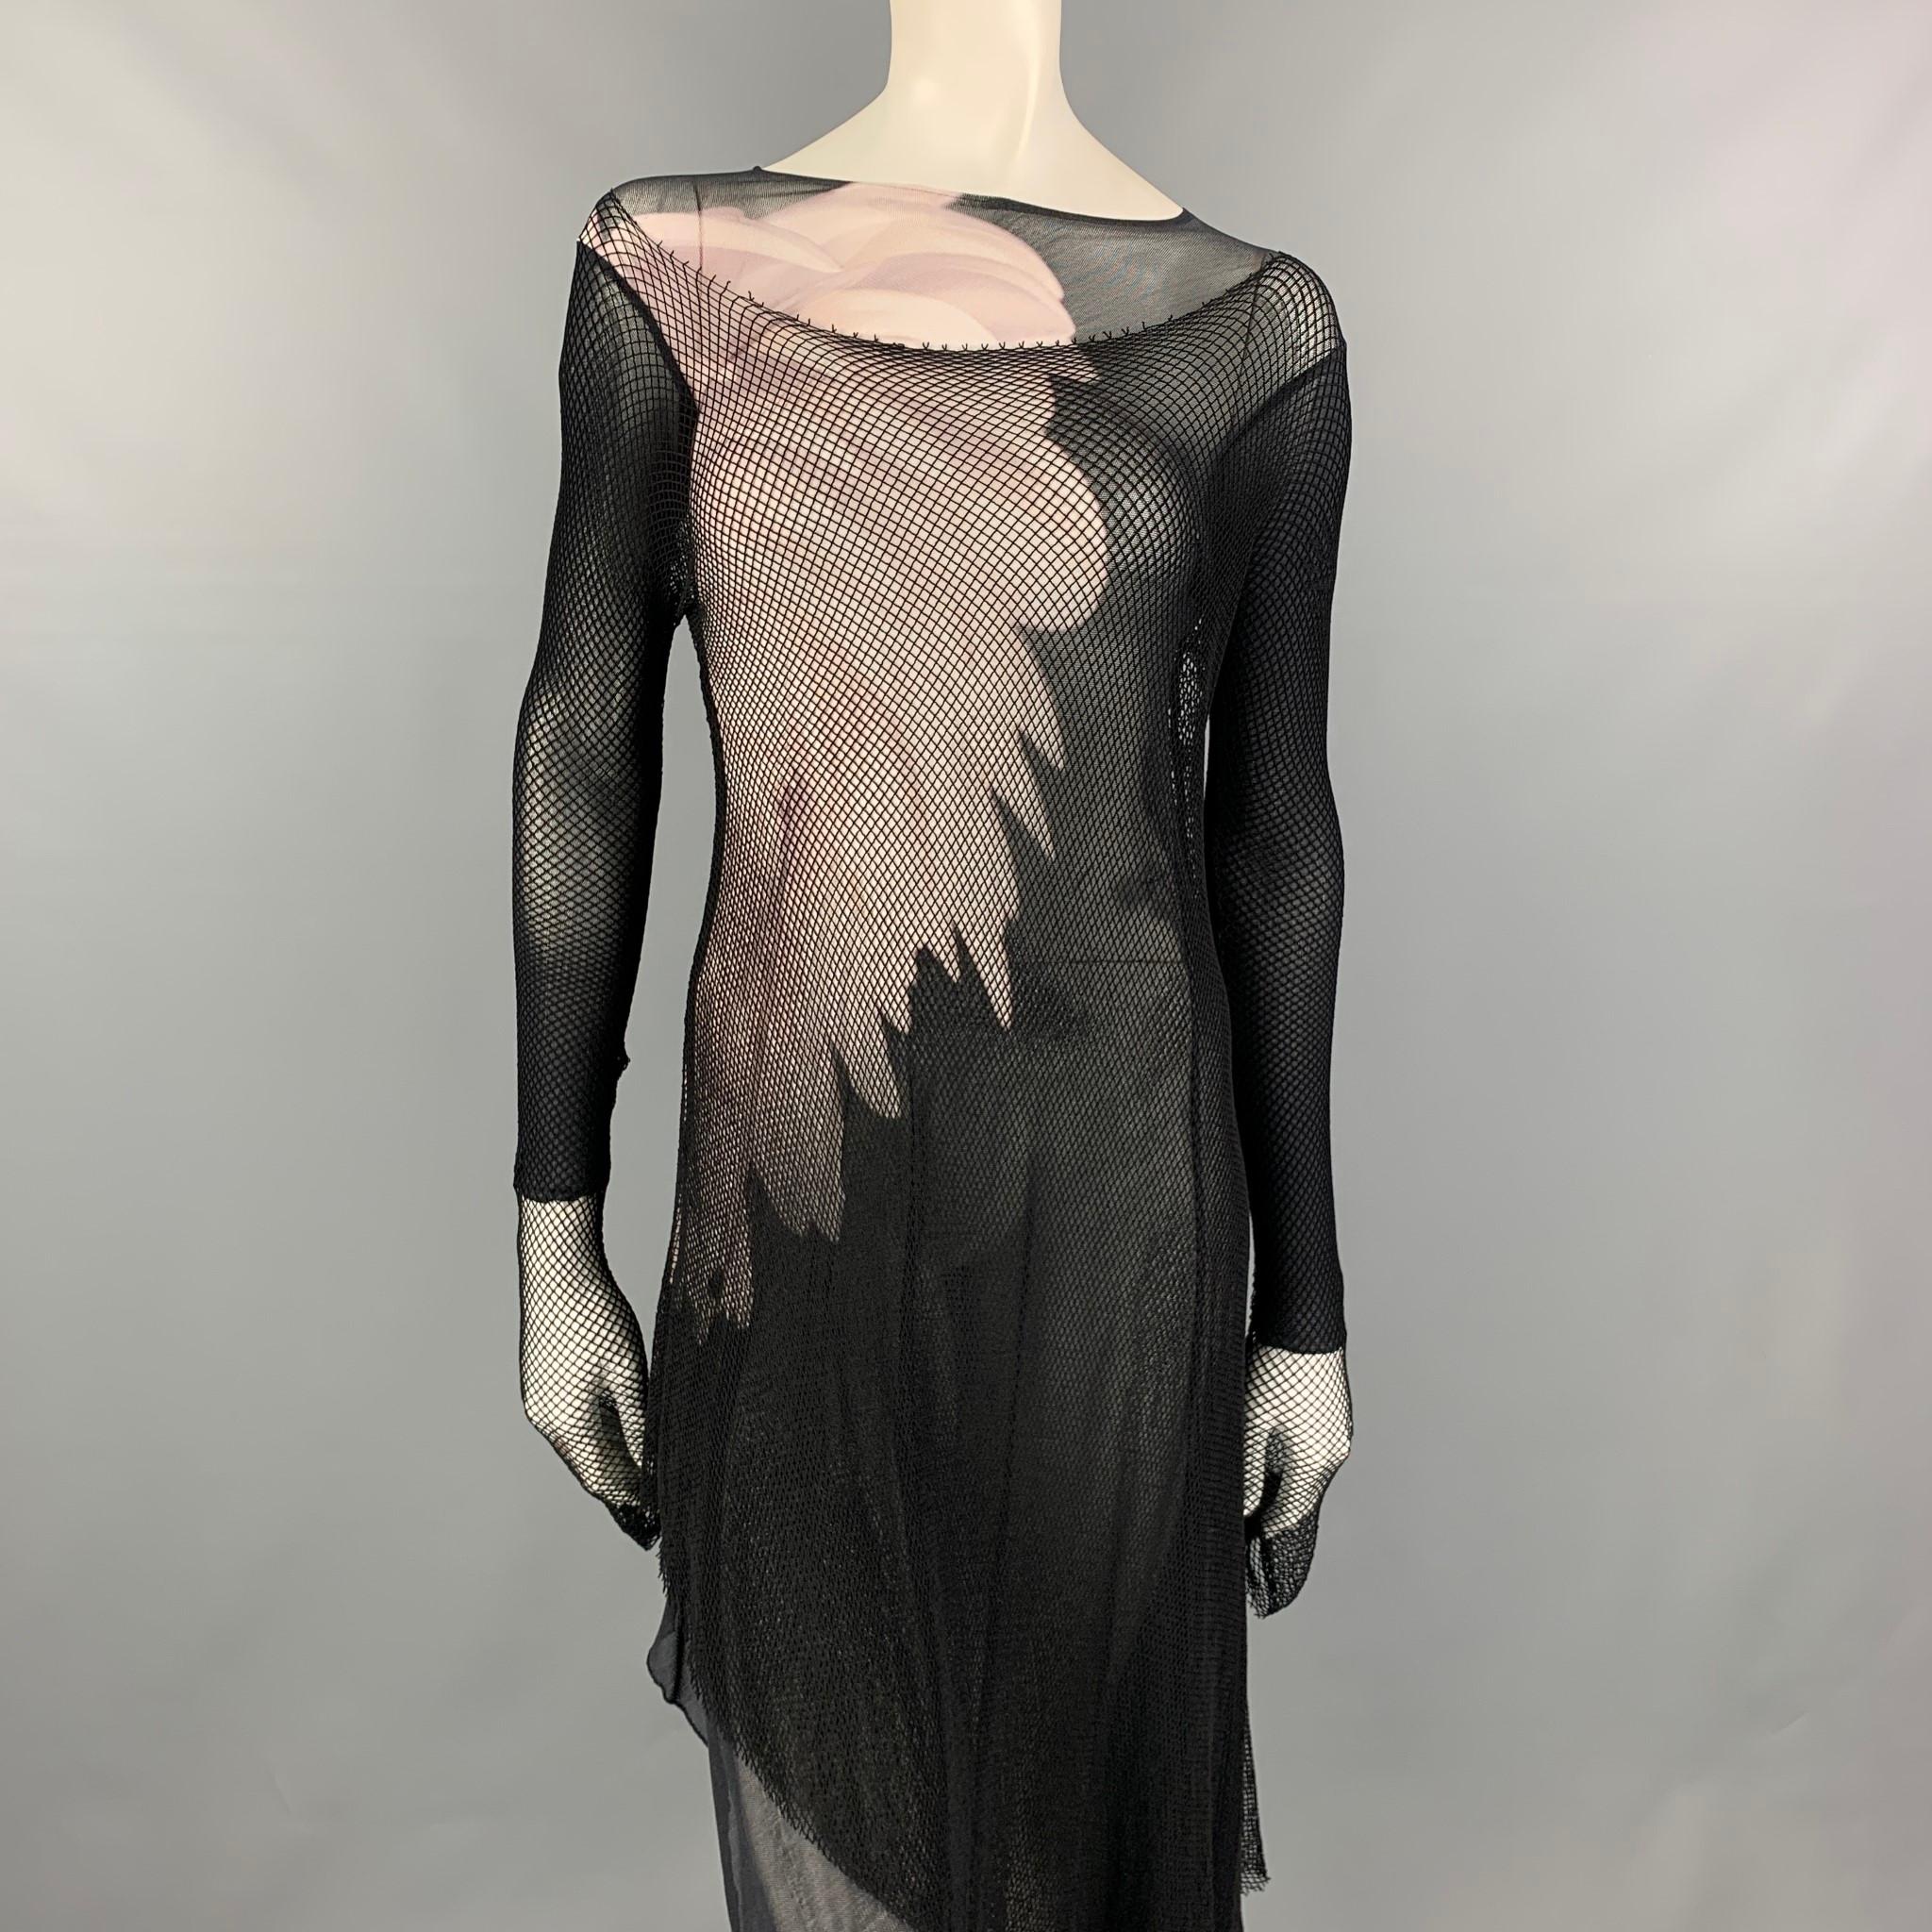 YOHJI YAMAMOTO Fall 2011 Collection dress comes in black & grey photo print material with a mesh overlay design featuring a asymmetrical style, long sleeves, and a wide neckline. 

Very Good Pre-Owned Condition. Fabric tag removed.
Marked: